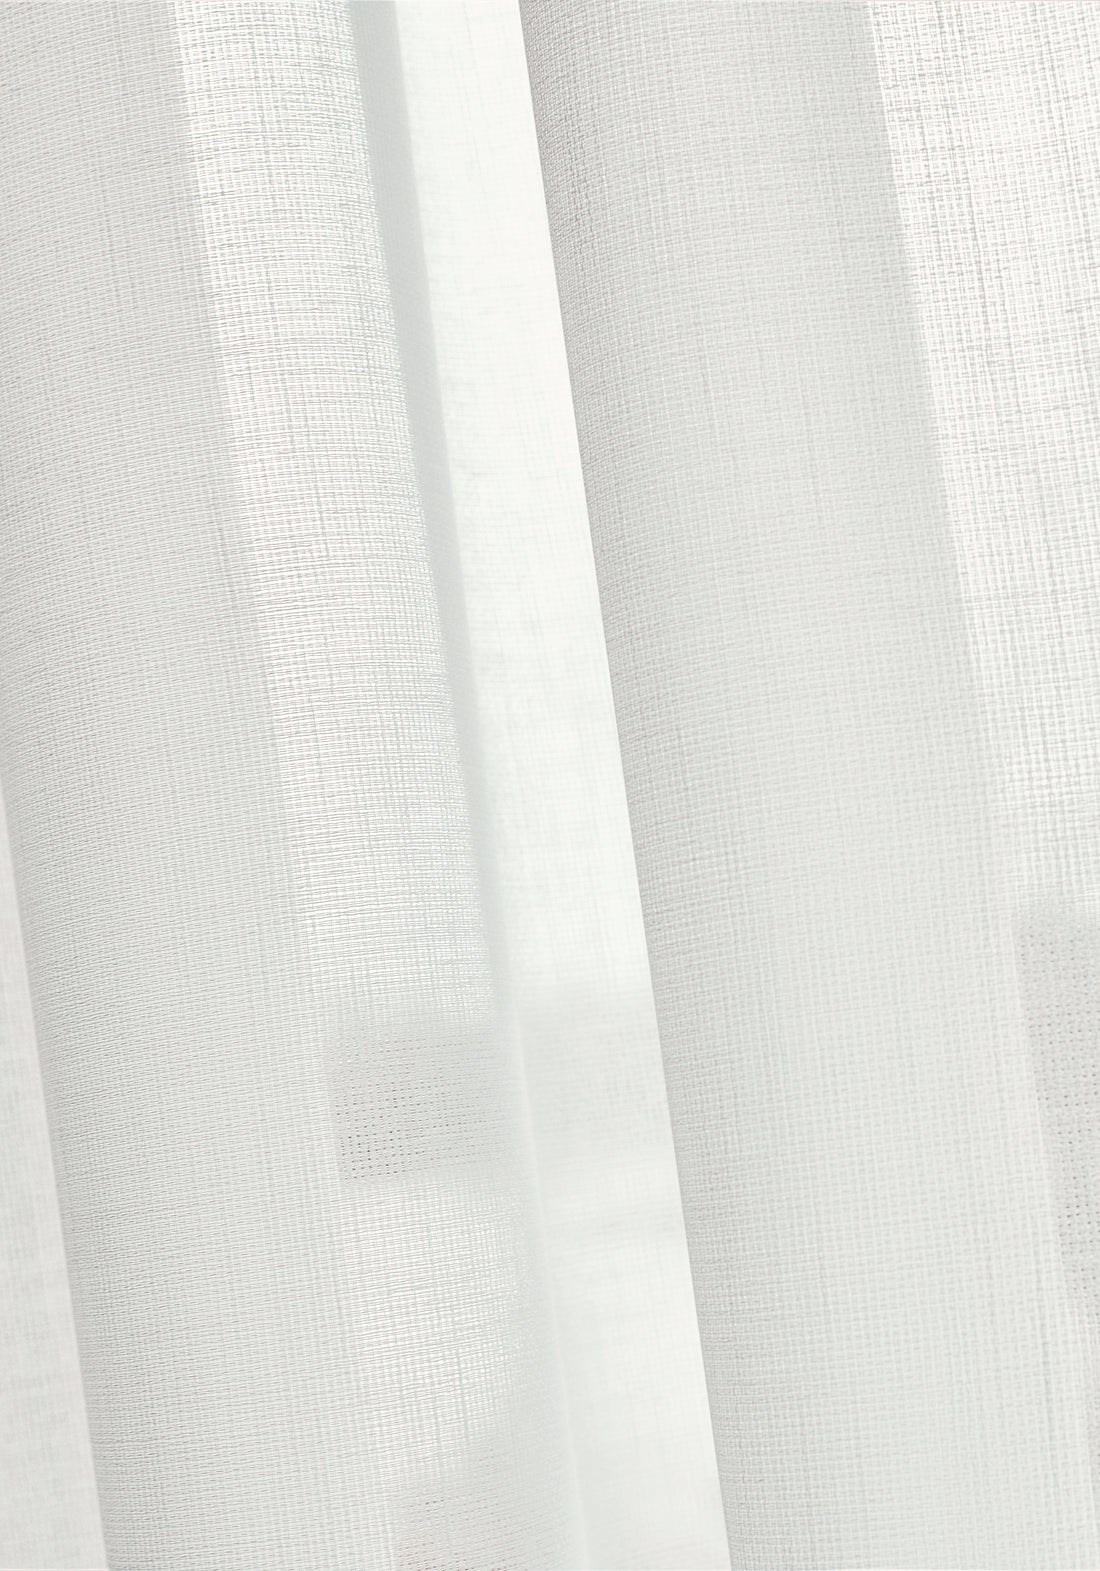 Sheer drapery curtains made with Thibaut Abbot woven fabric in Snow White color, pattern FWW7144